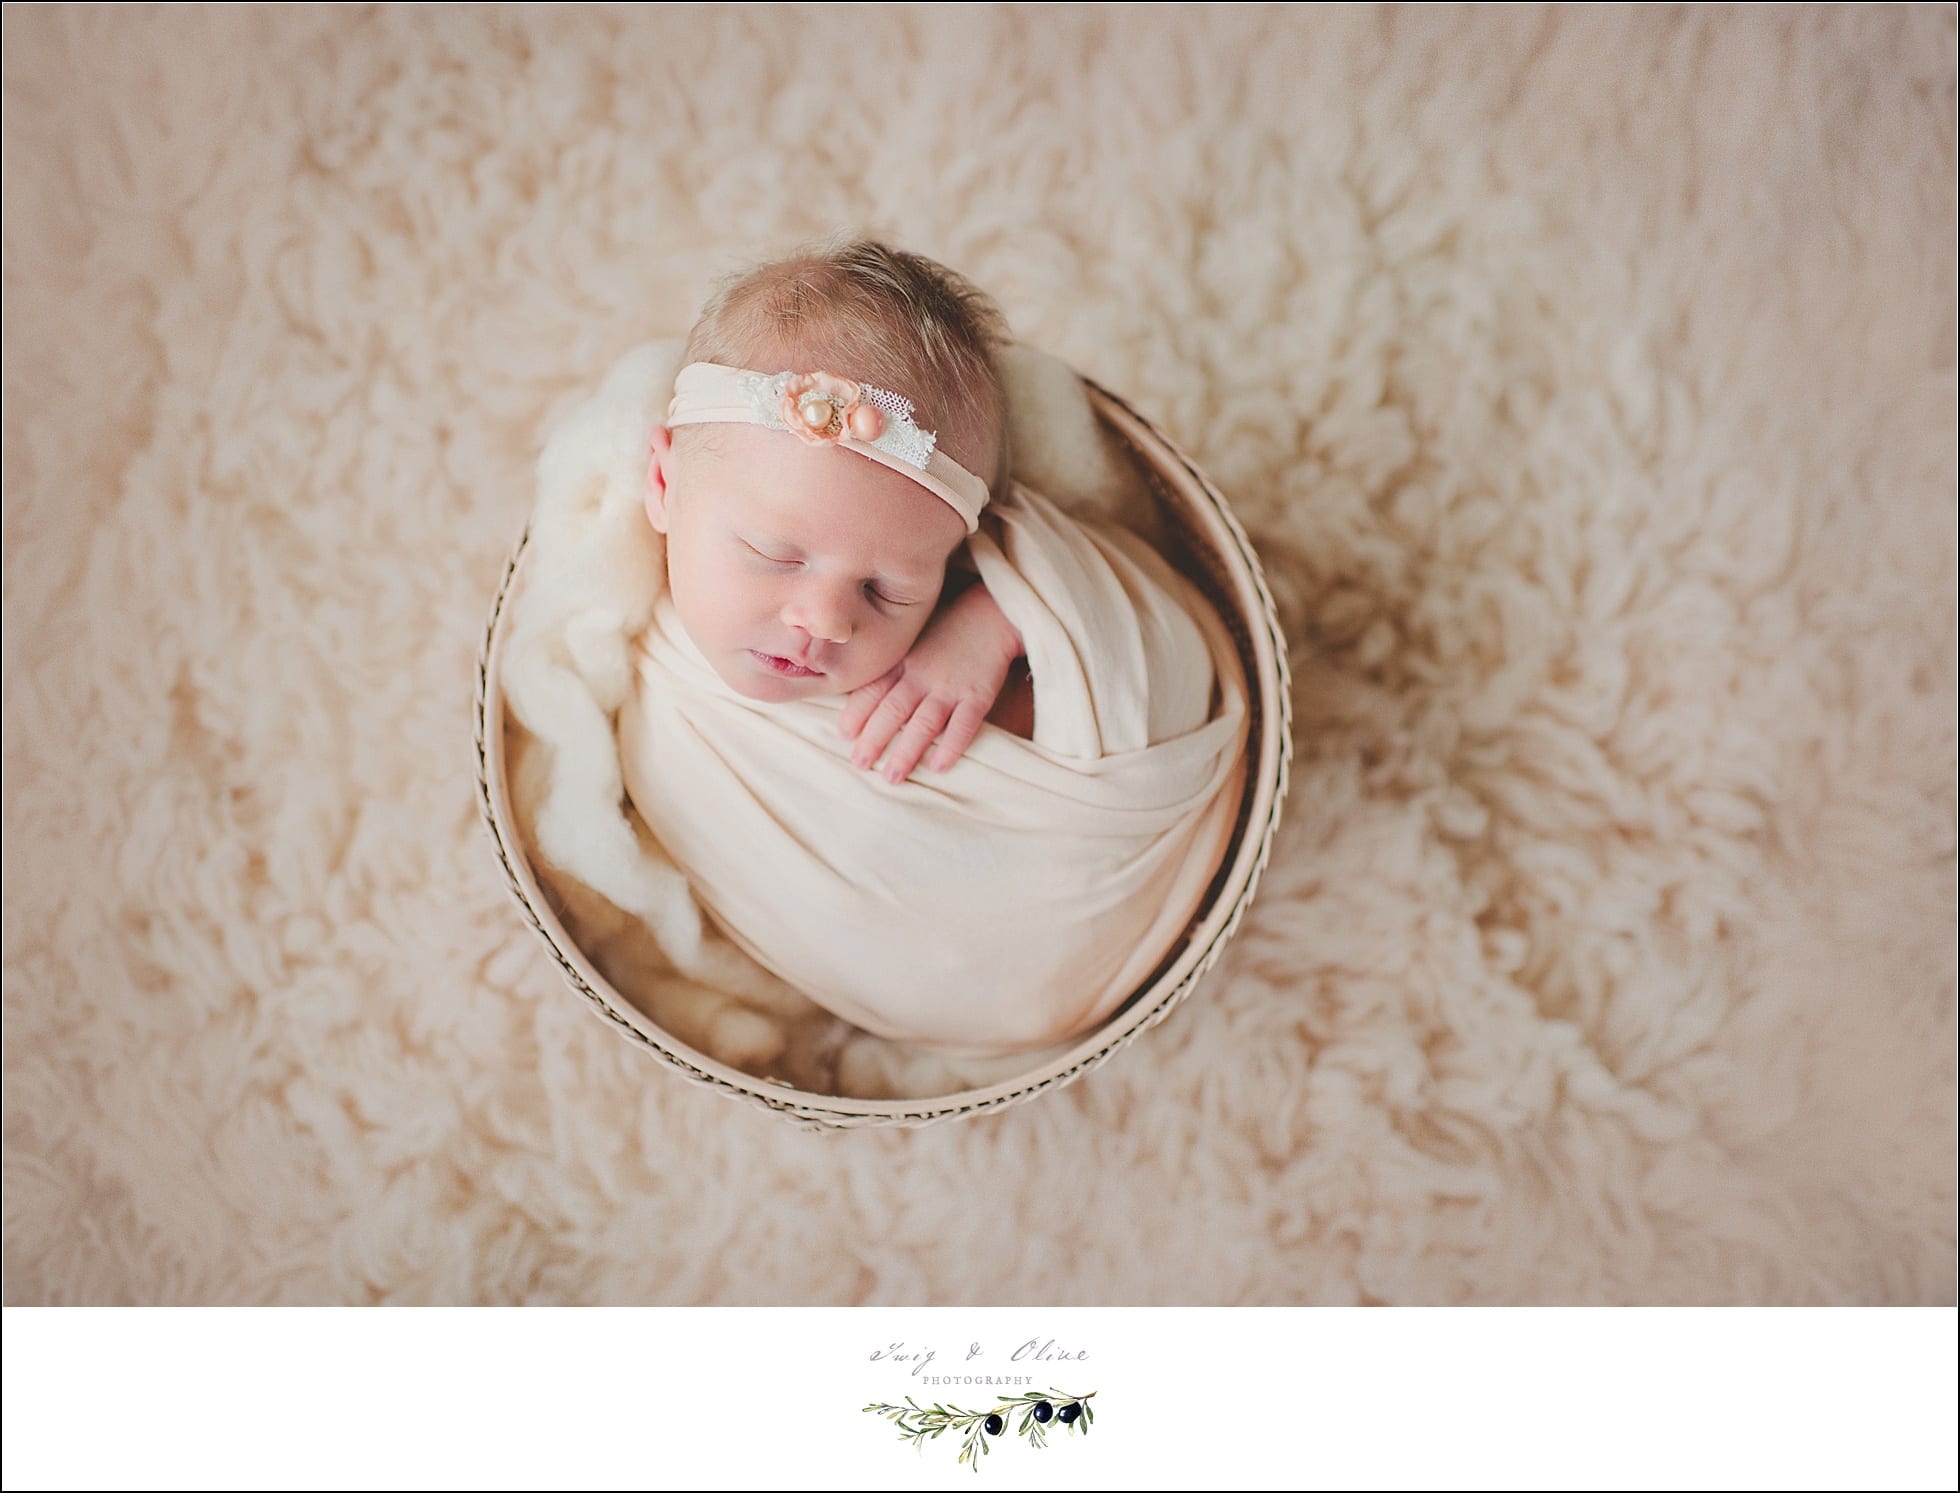 baskets, buckets, pails, elegant wraps, hair flowers, head bands, soft light, newborns, babies, Twig and Olive Photography